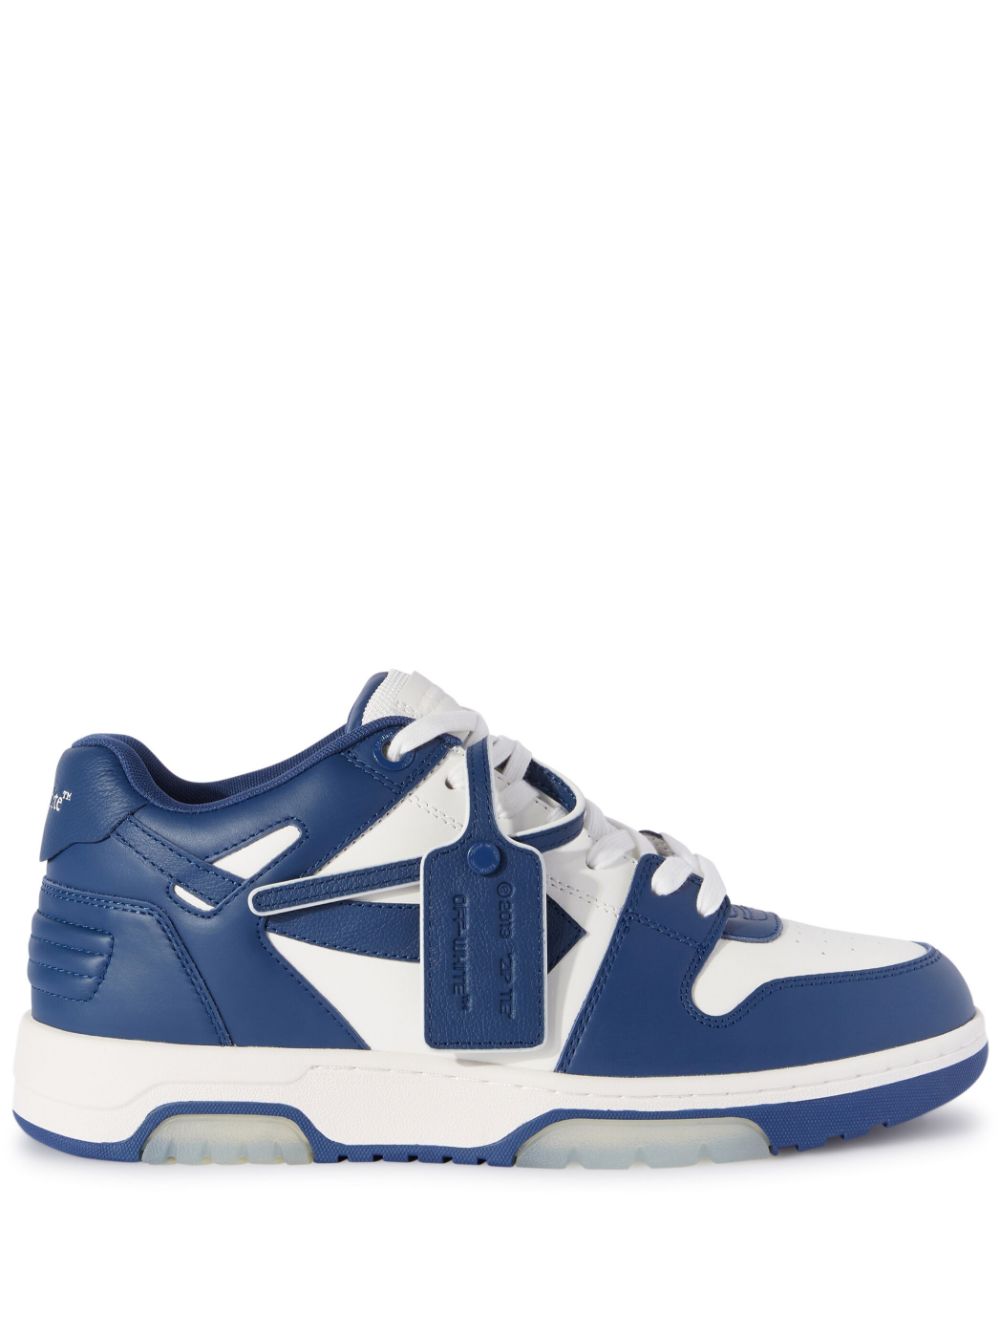 Off White Sneakers Blue-Off White-41-Urbanheer